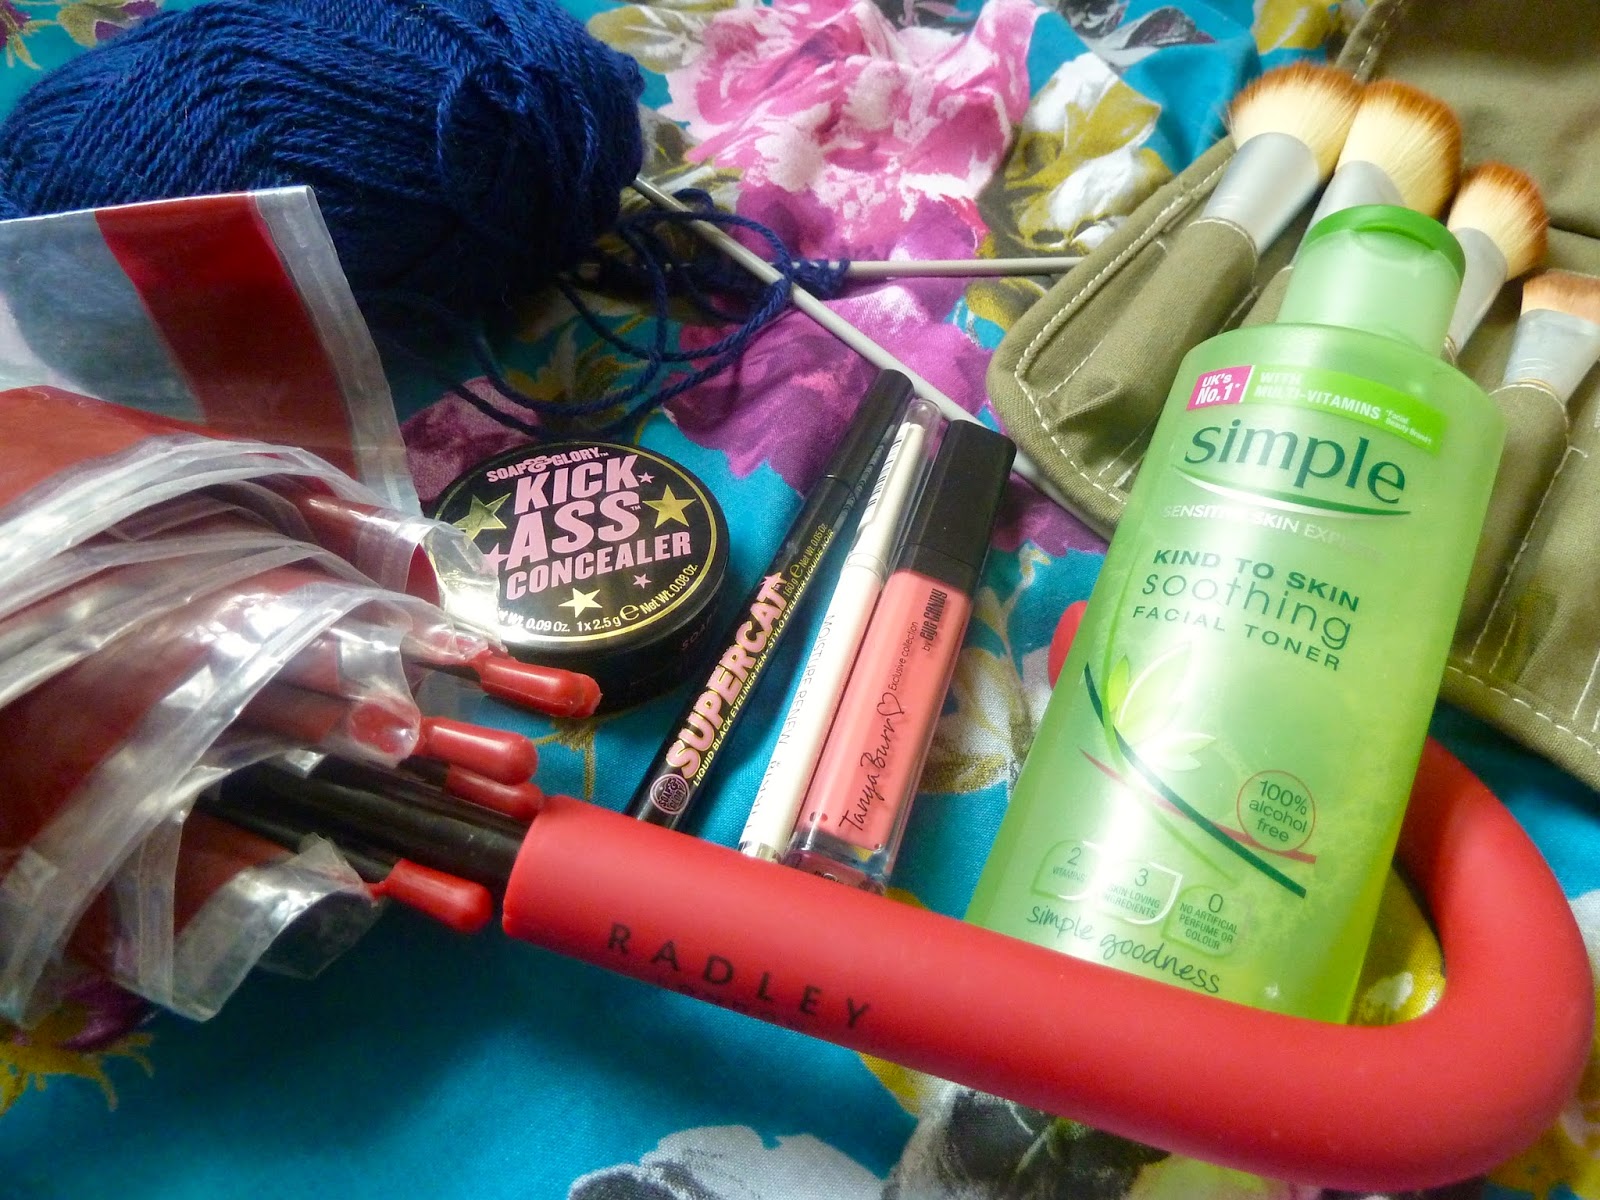 Picture of my favourites in August: Umbrella, Beauty Products and Knitting